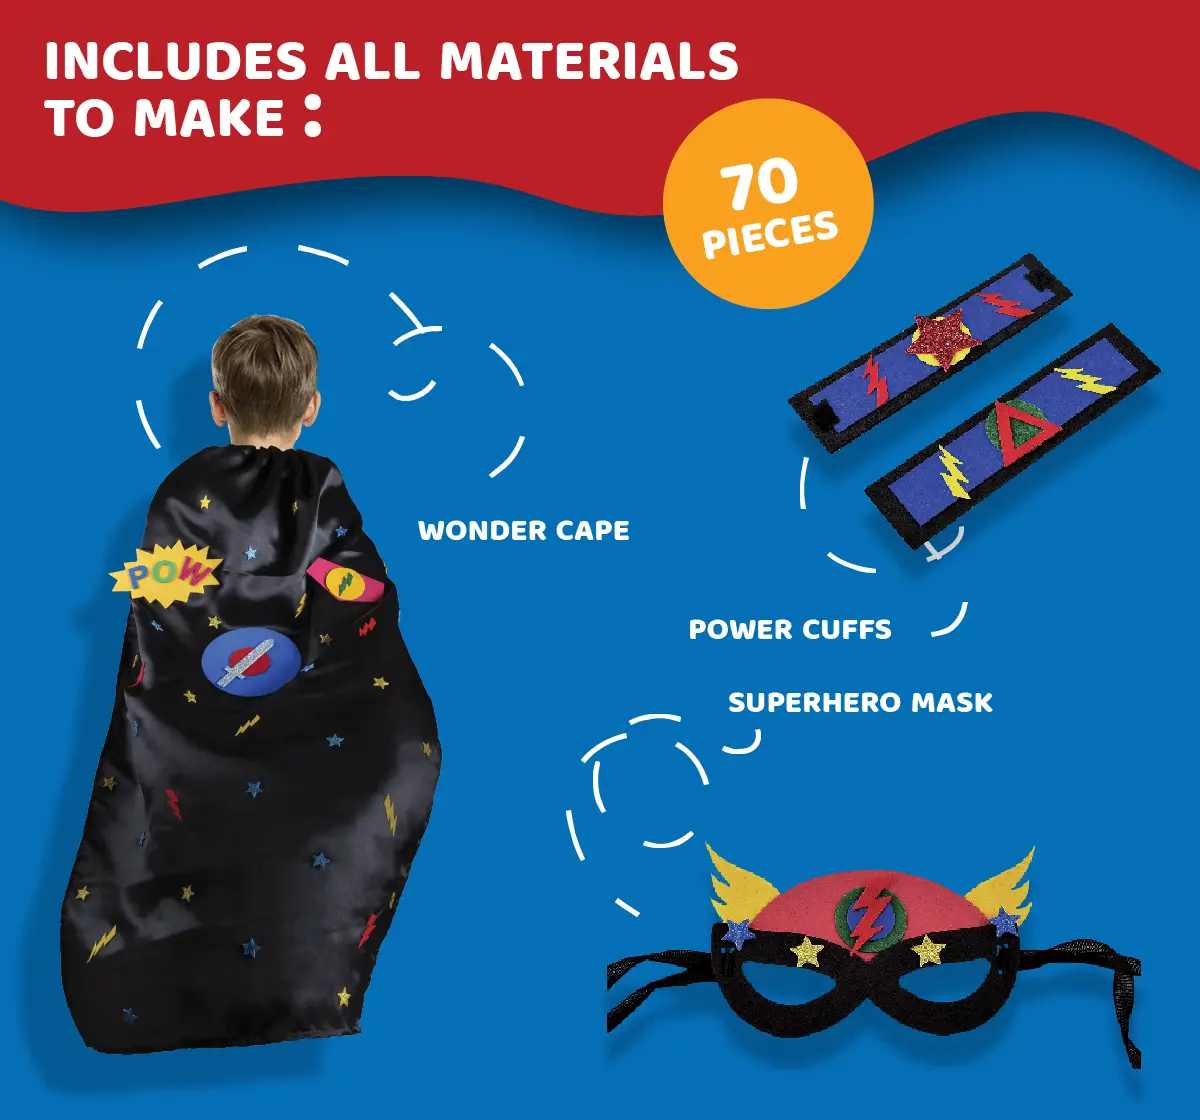 Jack In The Box Superhero DIY Costume Art and Craft 3 Craft Projects in 1 Box Kit Make a Cape, Mask and Cuffs For Boys Ages 3Y+, Multicolour